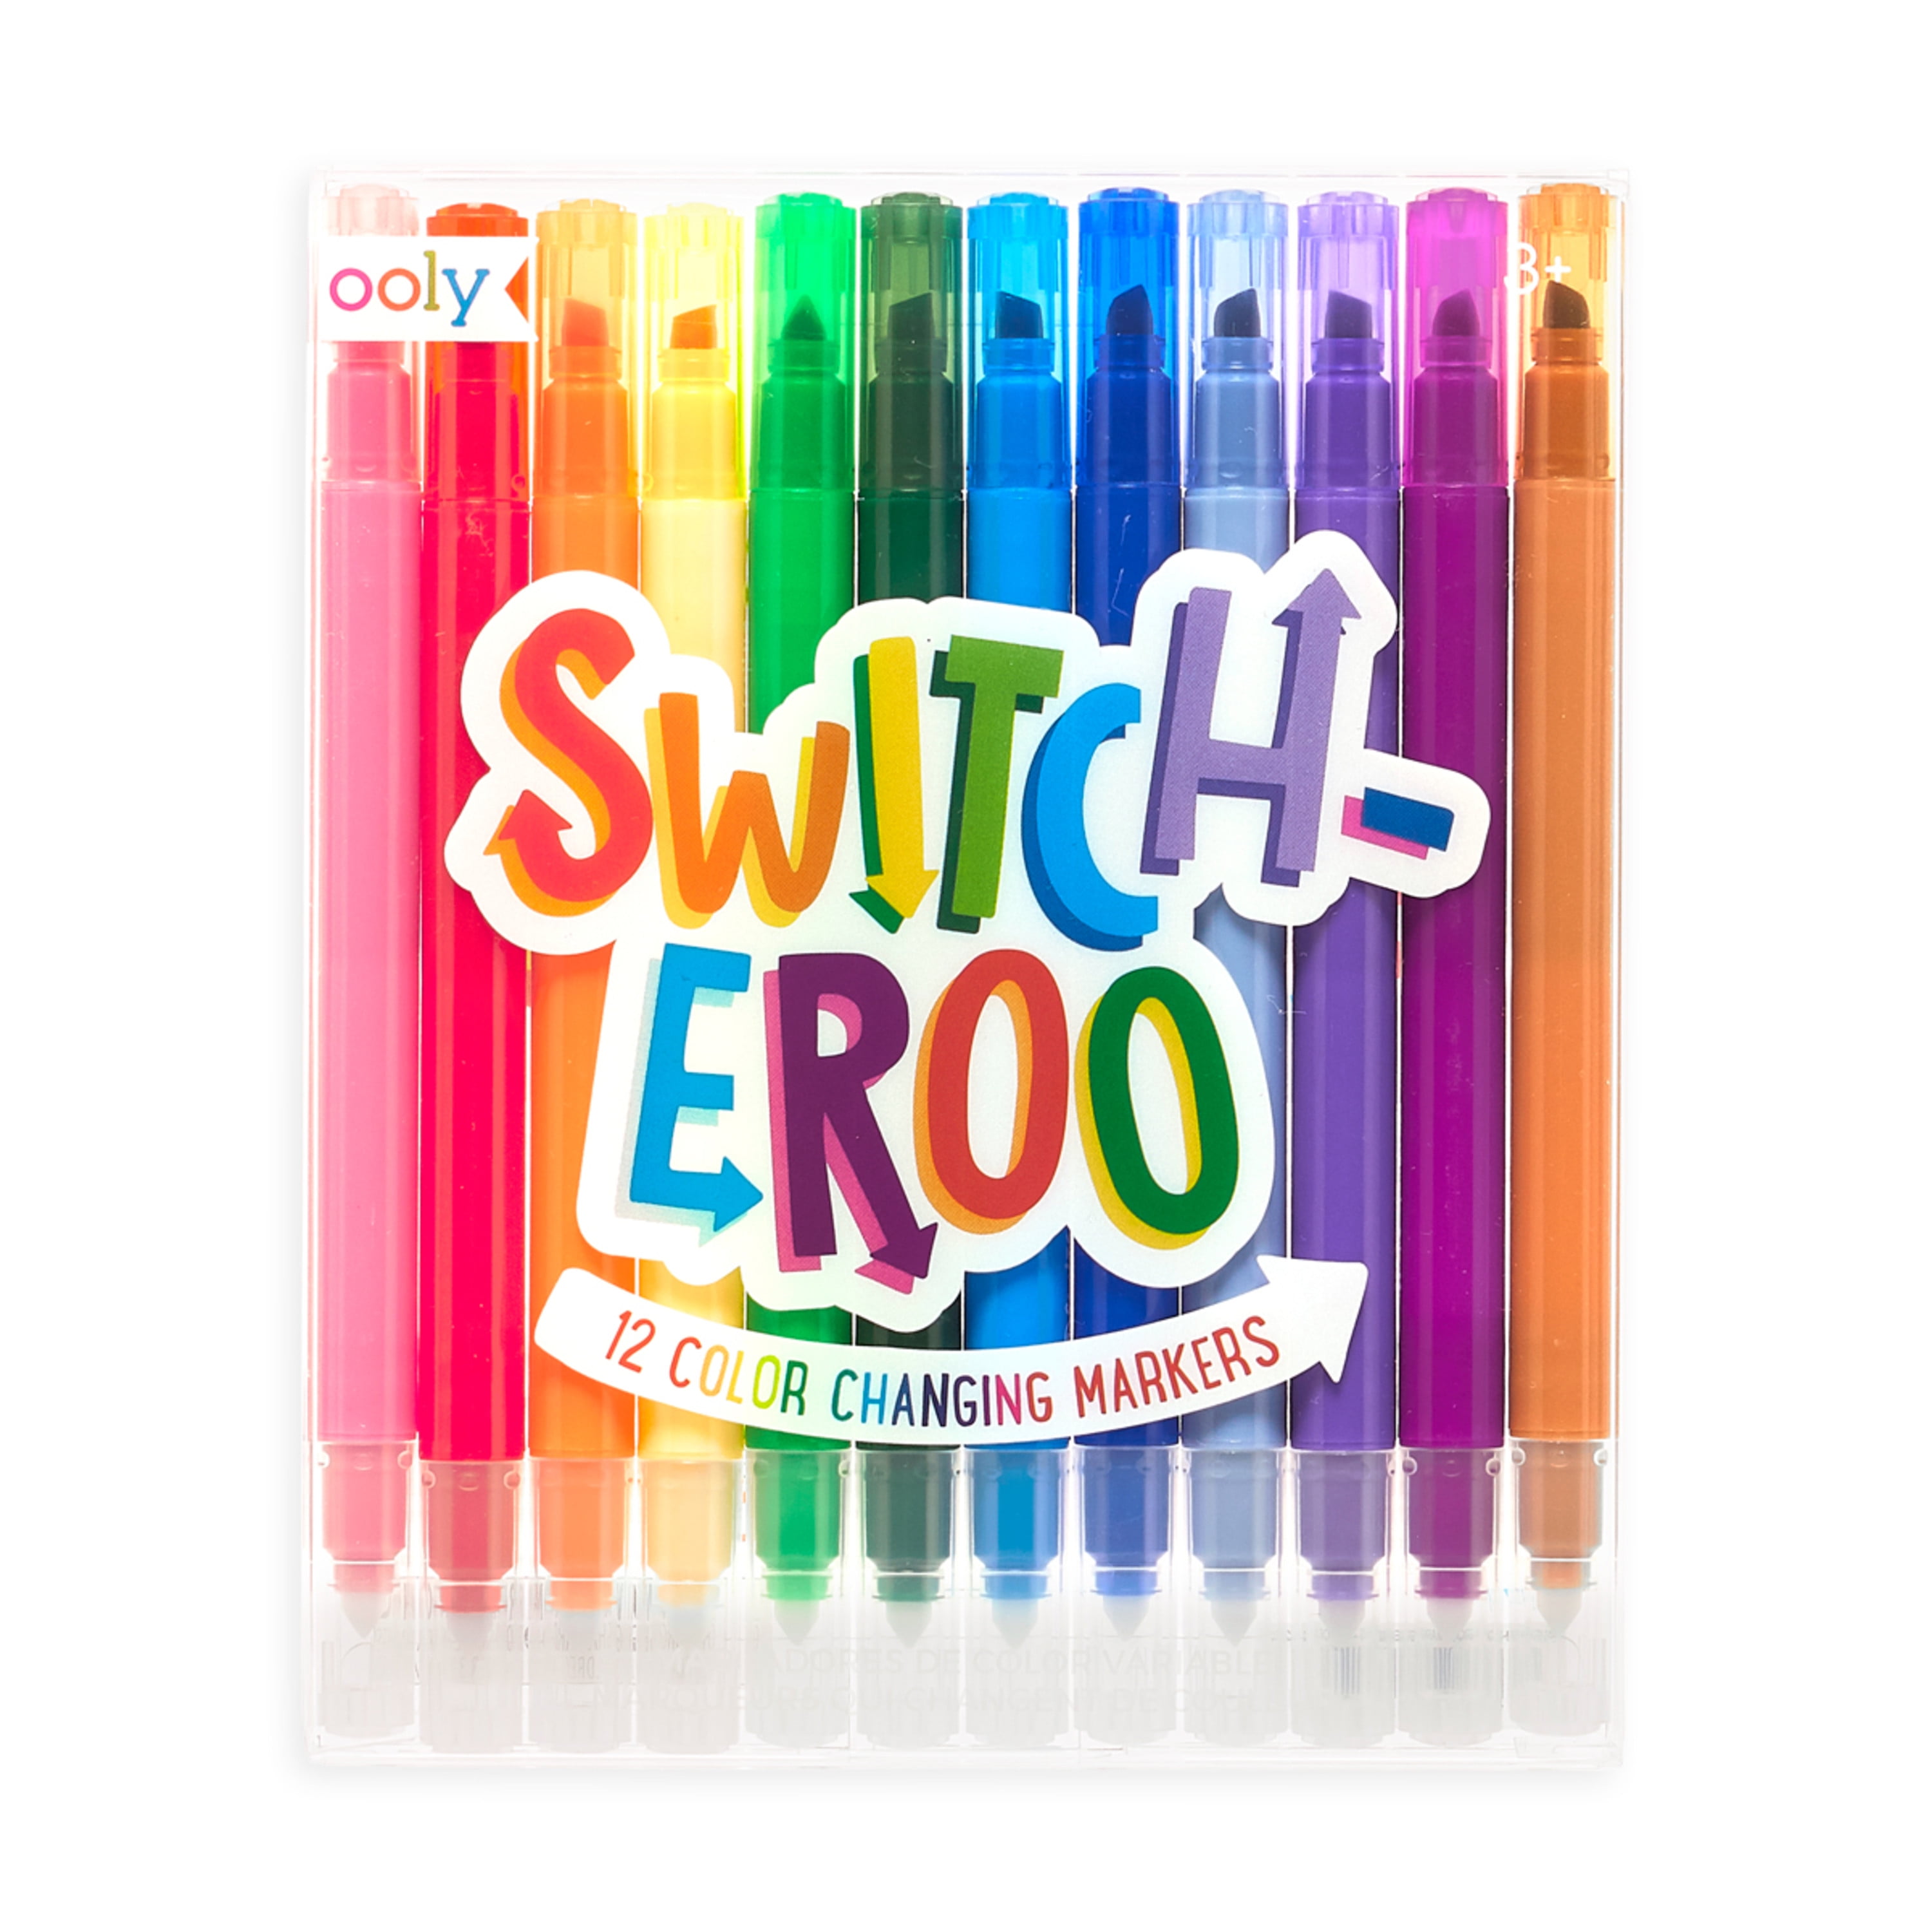 Ooly Switch-Eroo Color Changing Markers - Set of 12 – Minim Kids